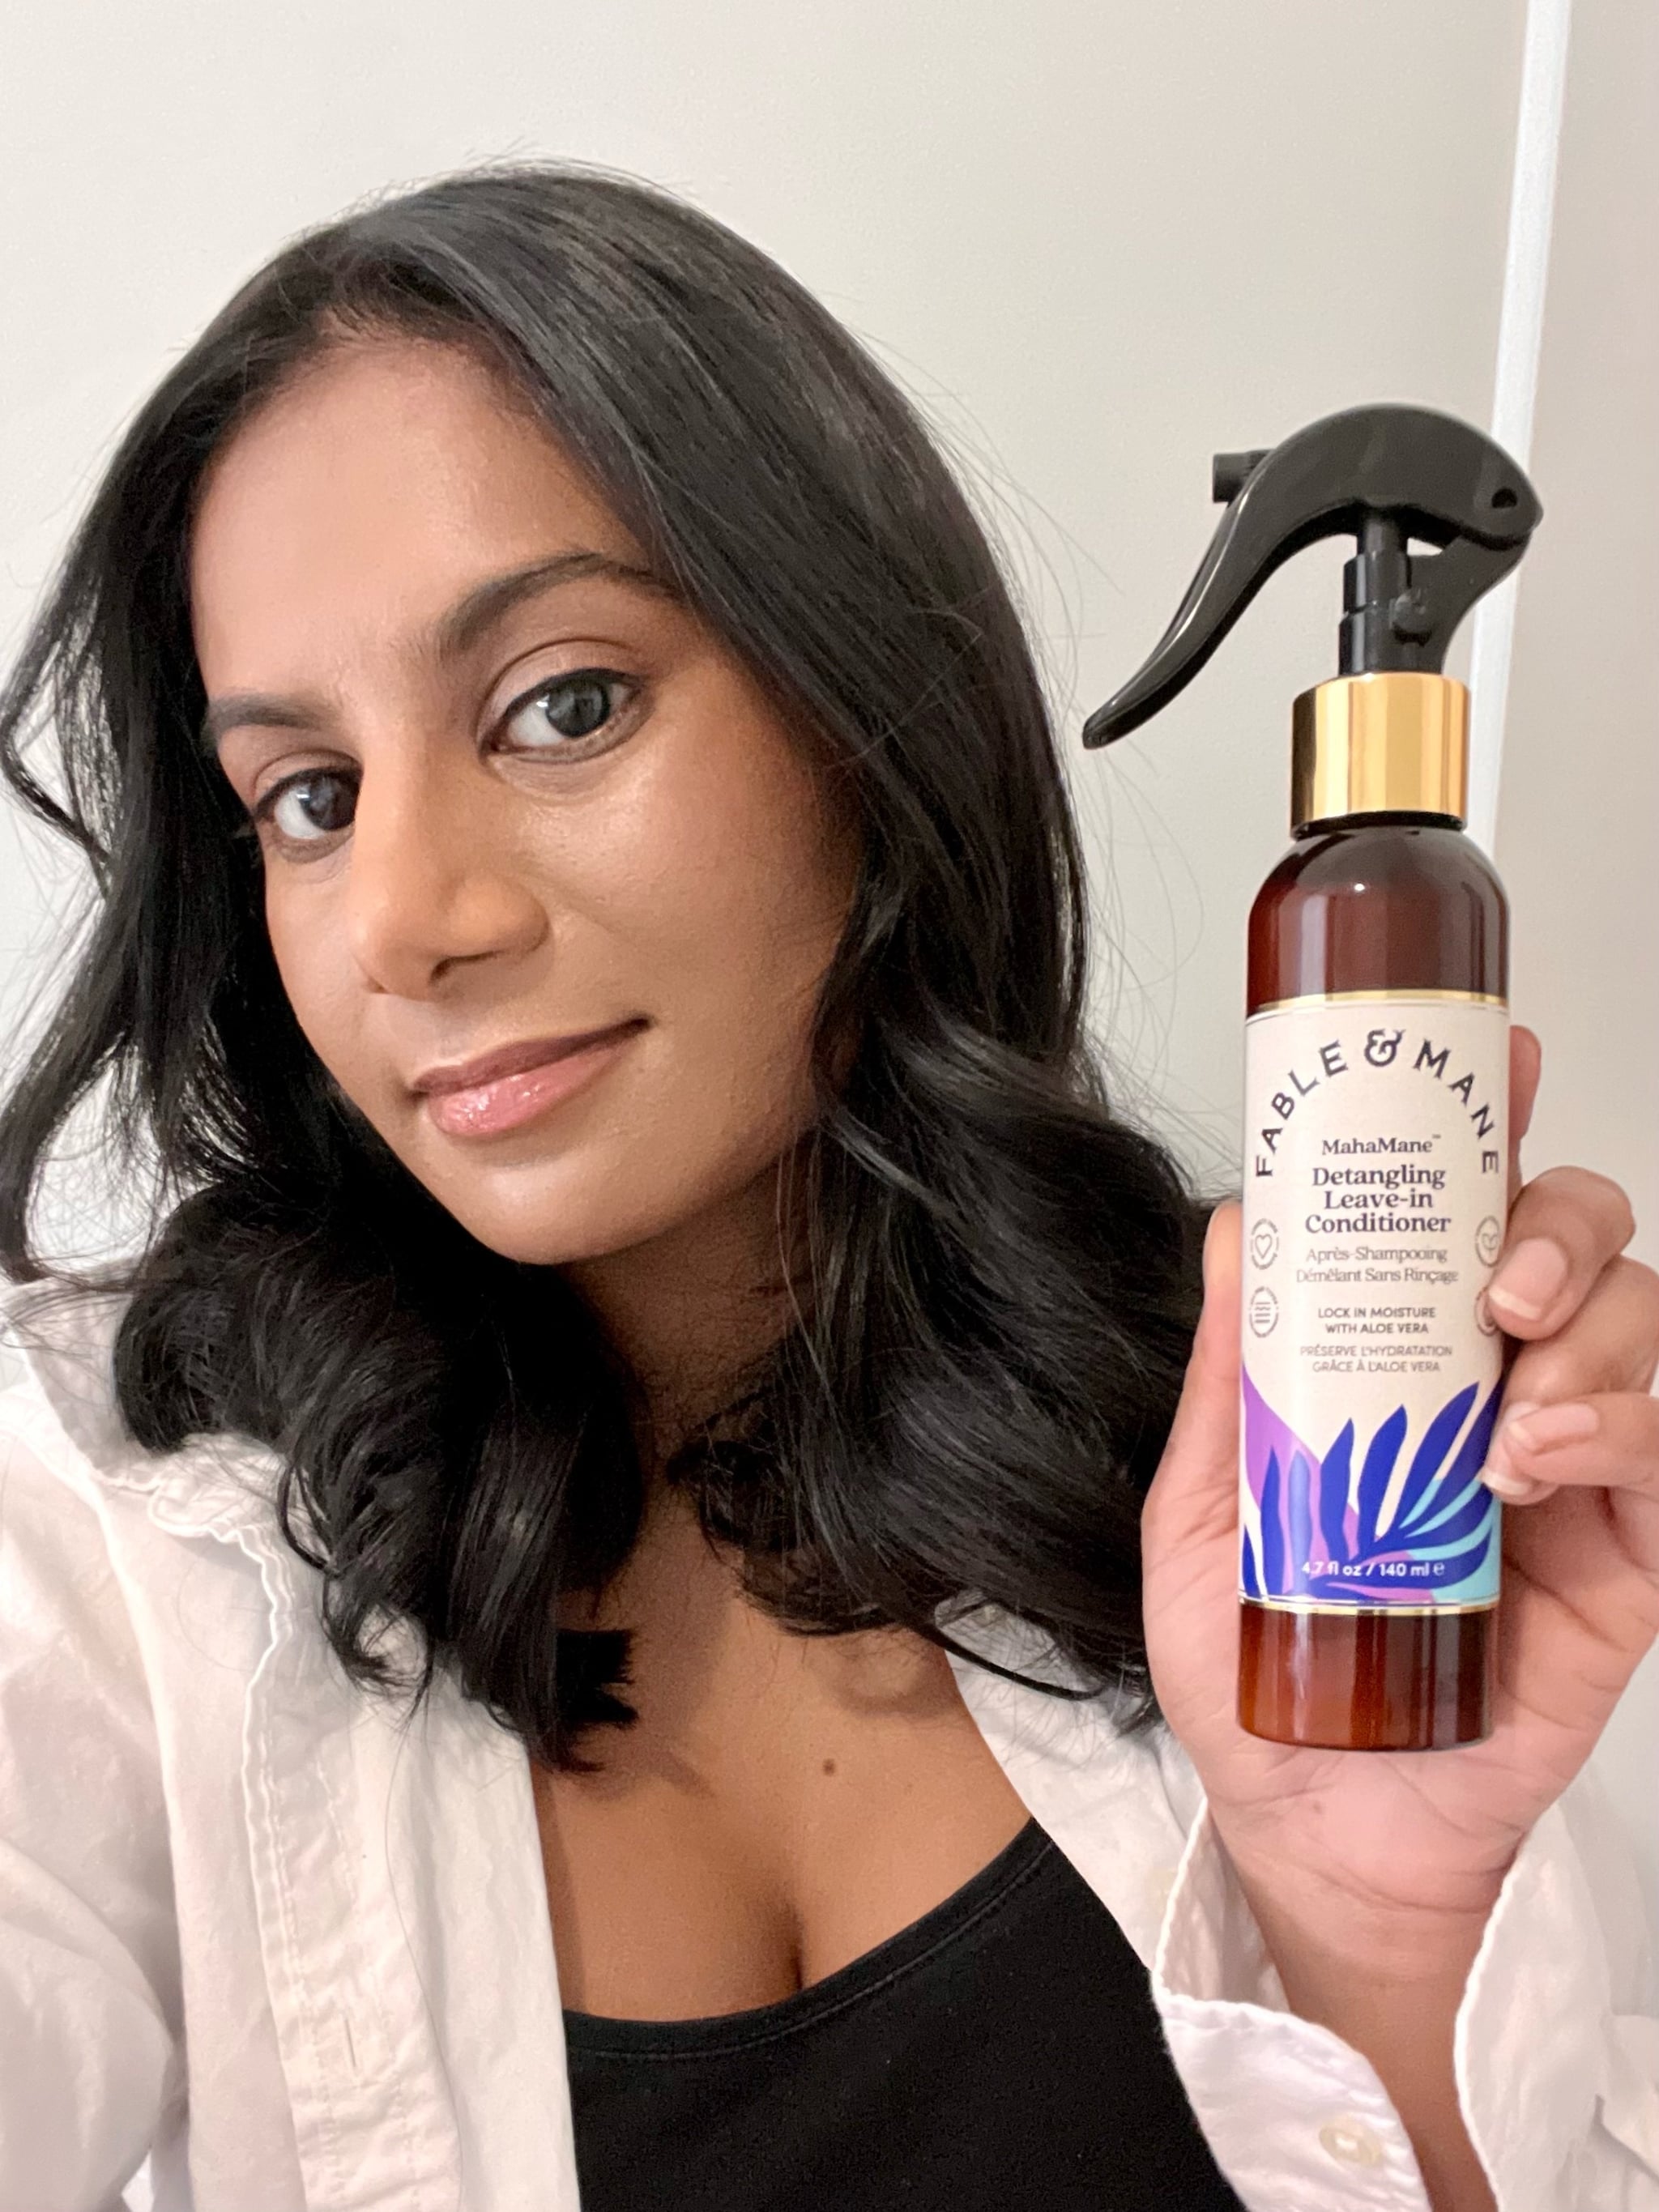 woman holding the Fable and Mane Mahamane Detangling Leave-In Conditioner.